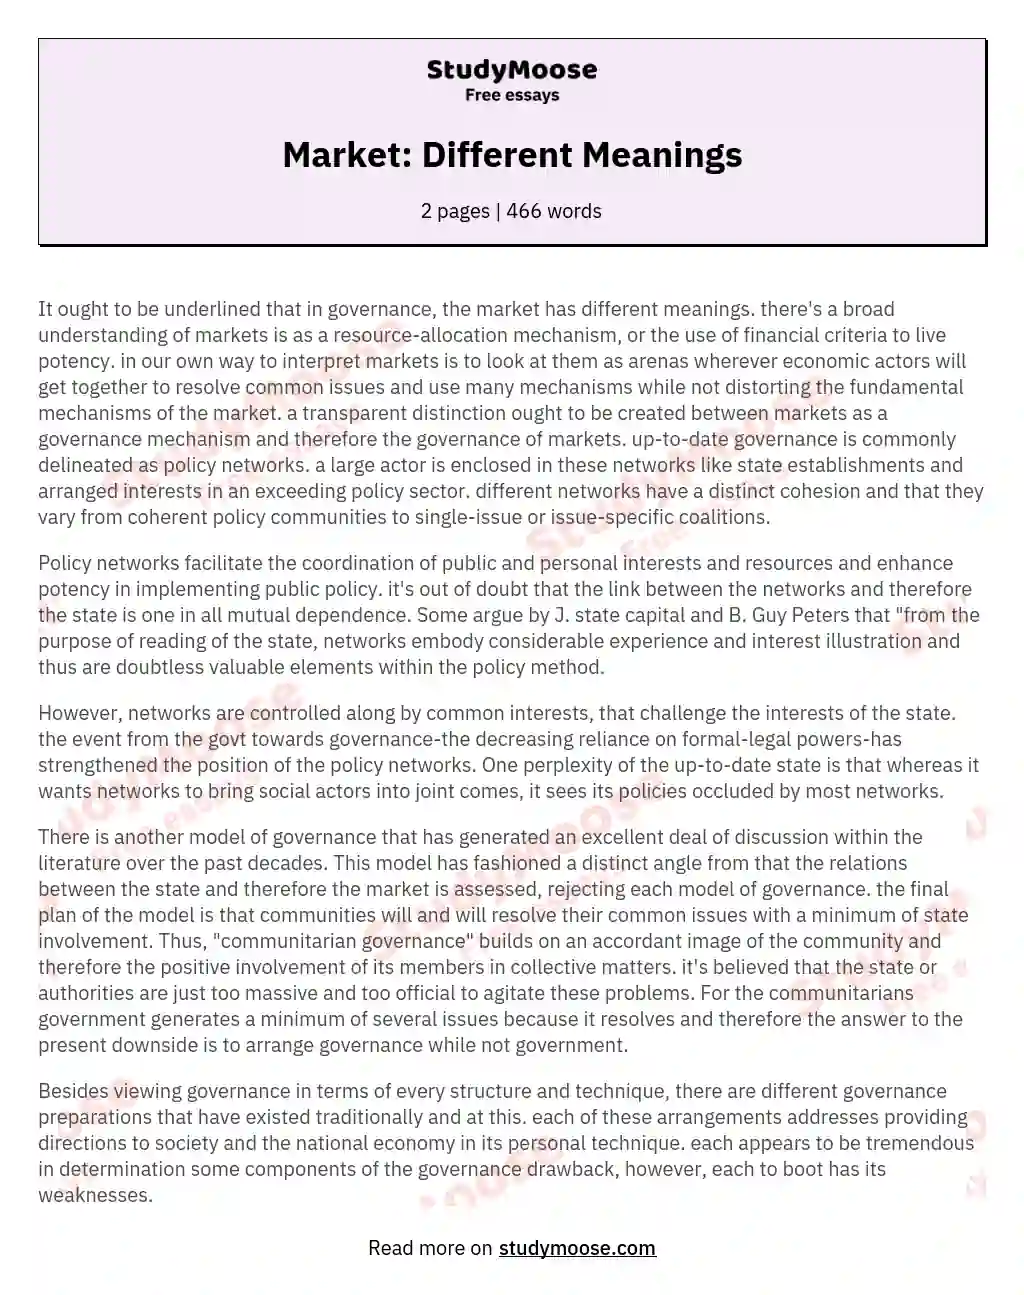 Market: Different Meanings essay